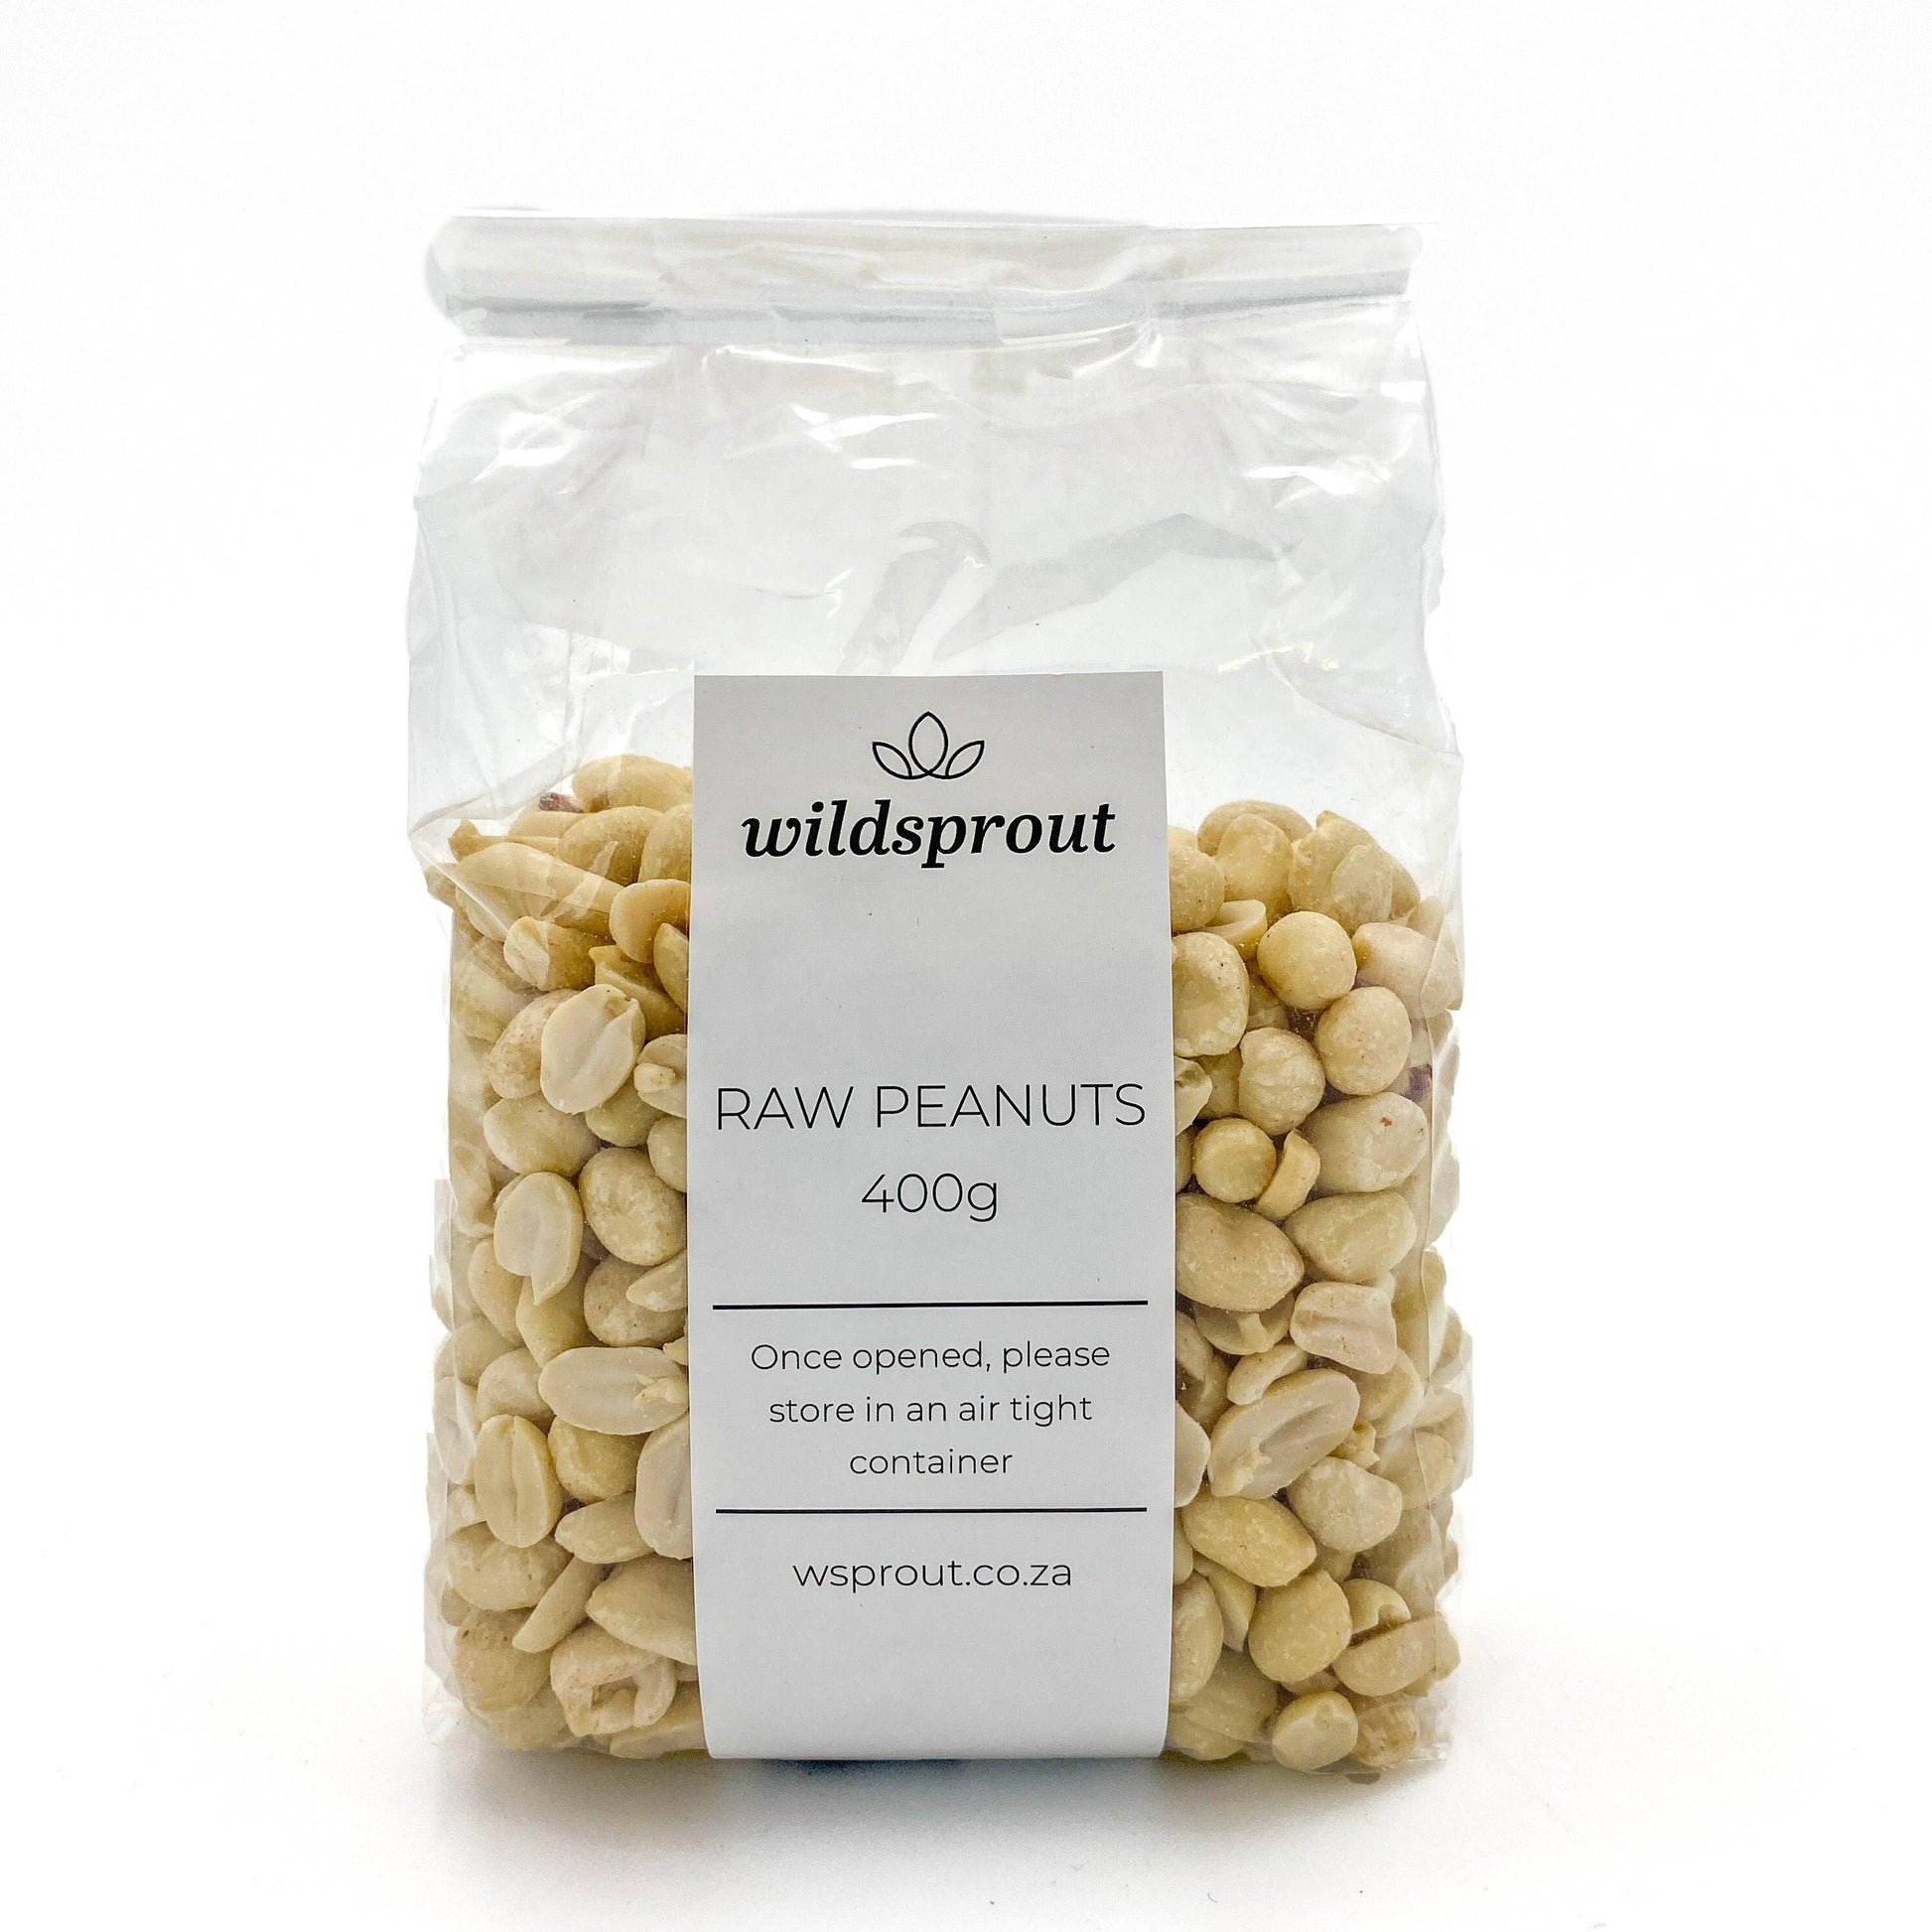 Raw Peanuts 400g - Wildsprout